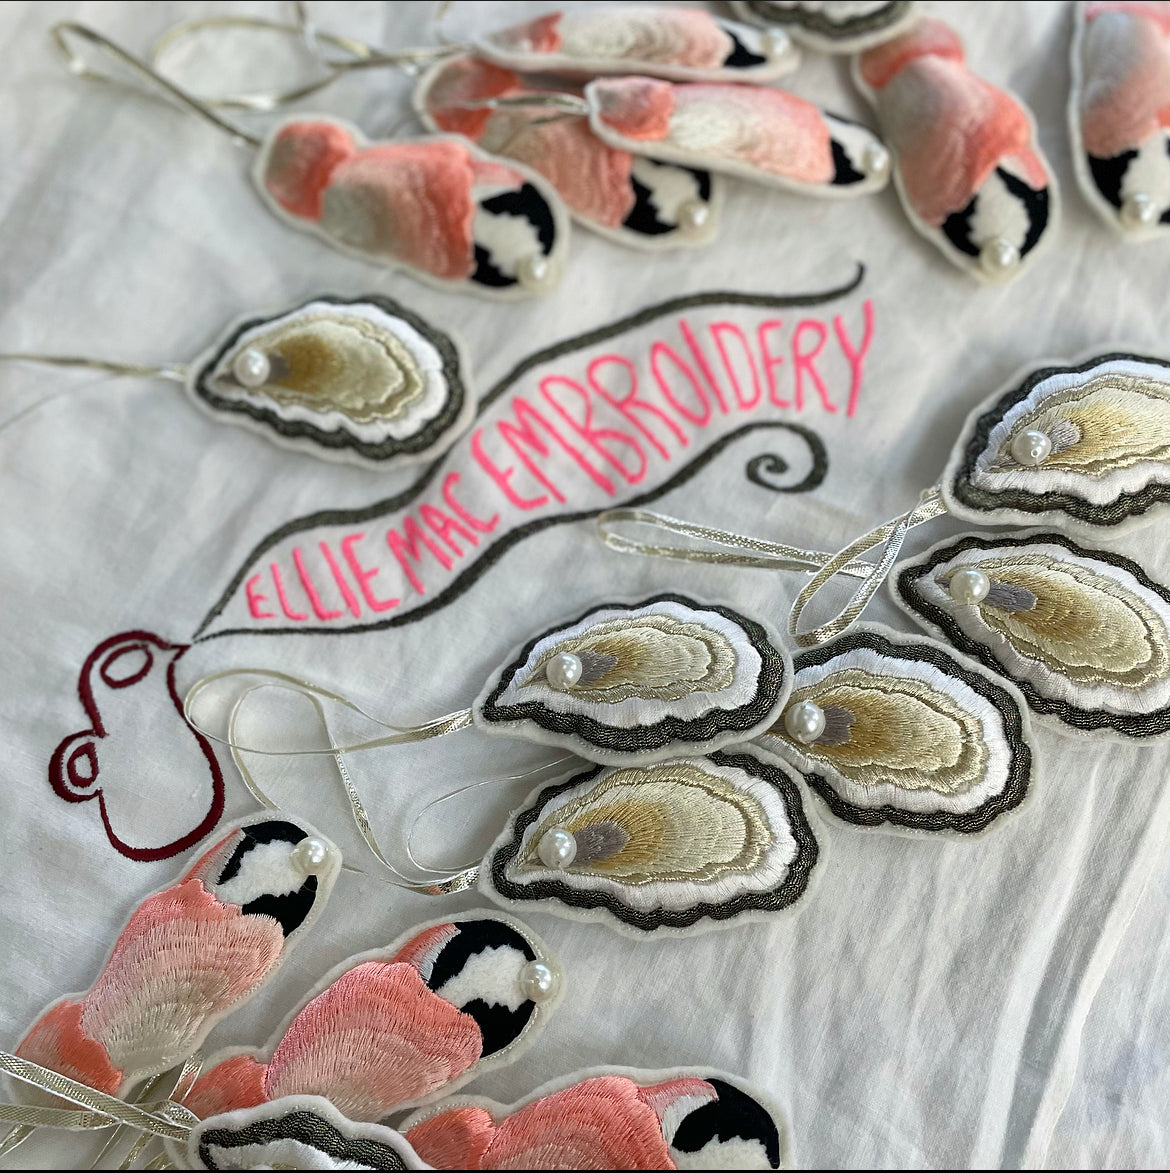 White cloth with Ellie Mac Embroidery sewn on and a selection of embroidered decorations of oysters and crab claws laid on top